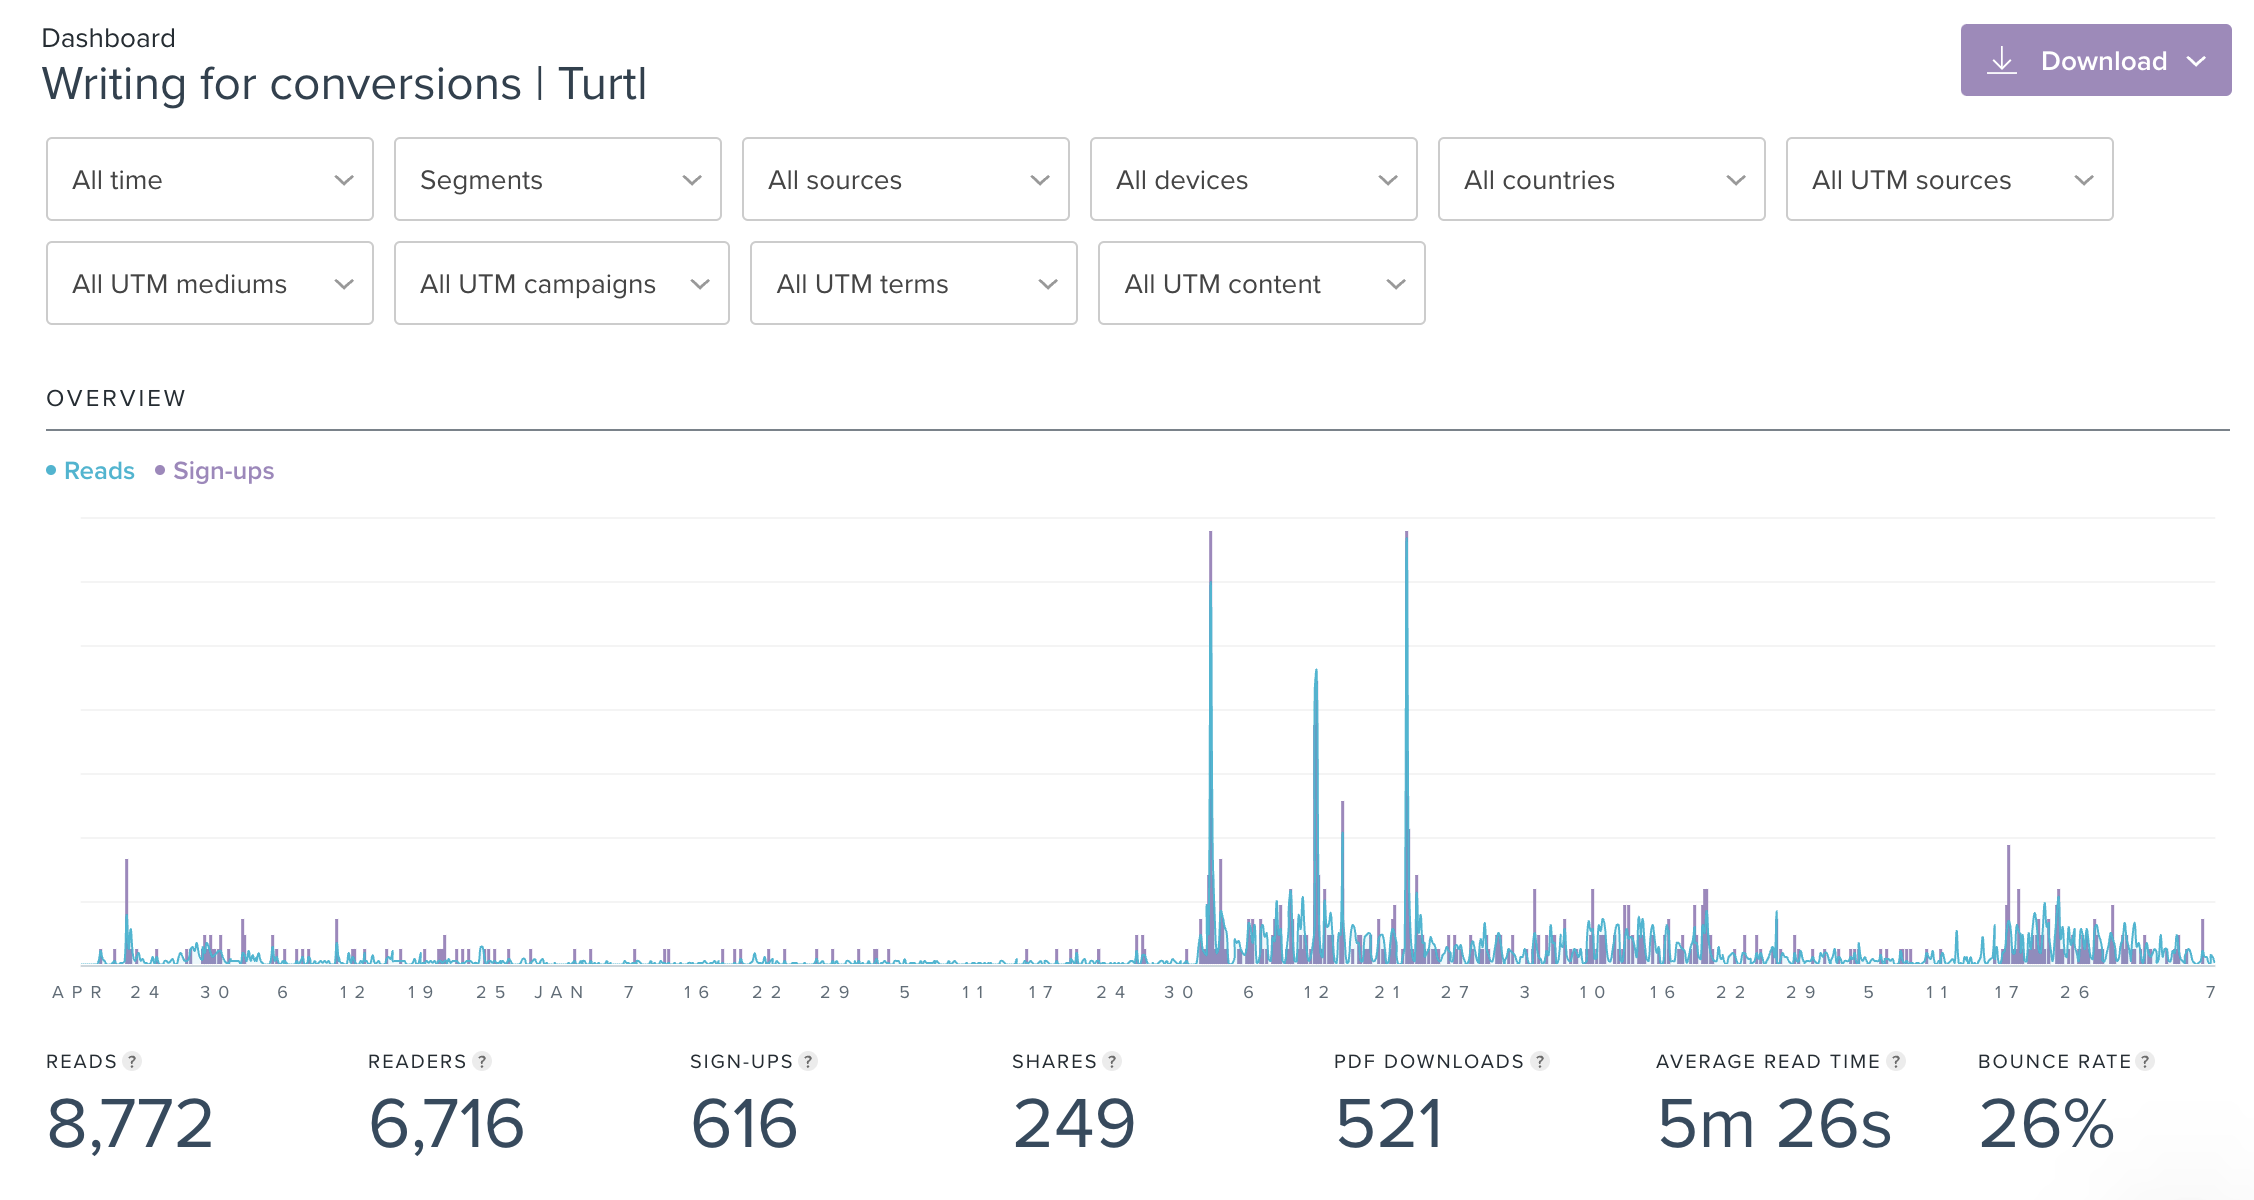 A screenshot from the Turtl Analytics Dashboard. It shows figures such as reads, read time, shares, and sign ups. 